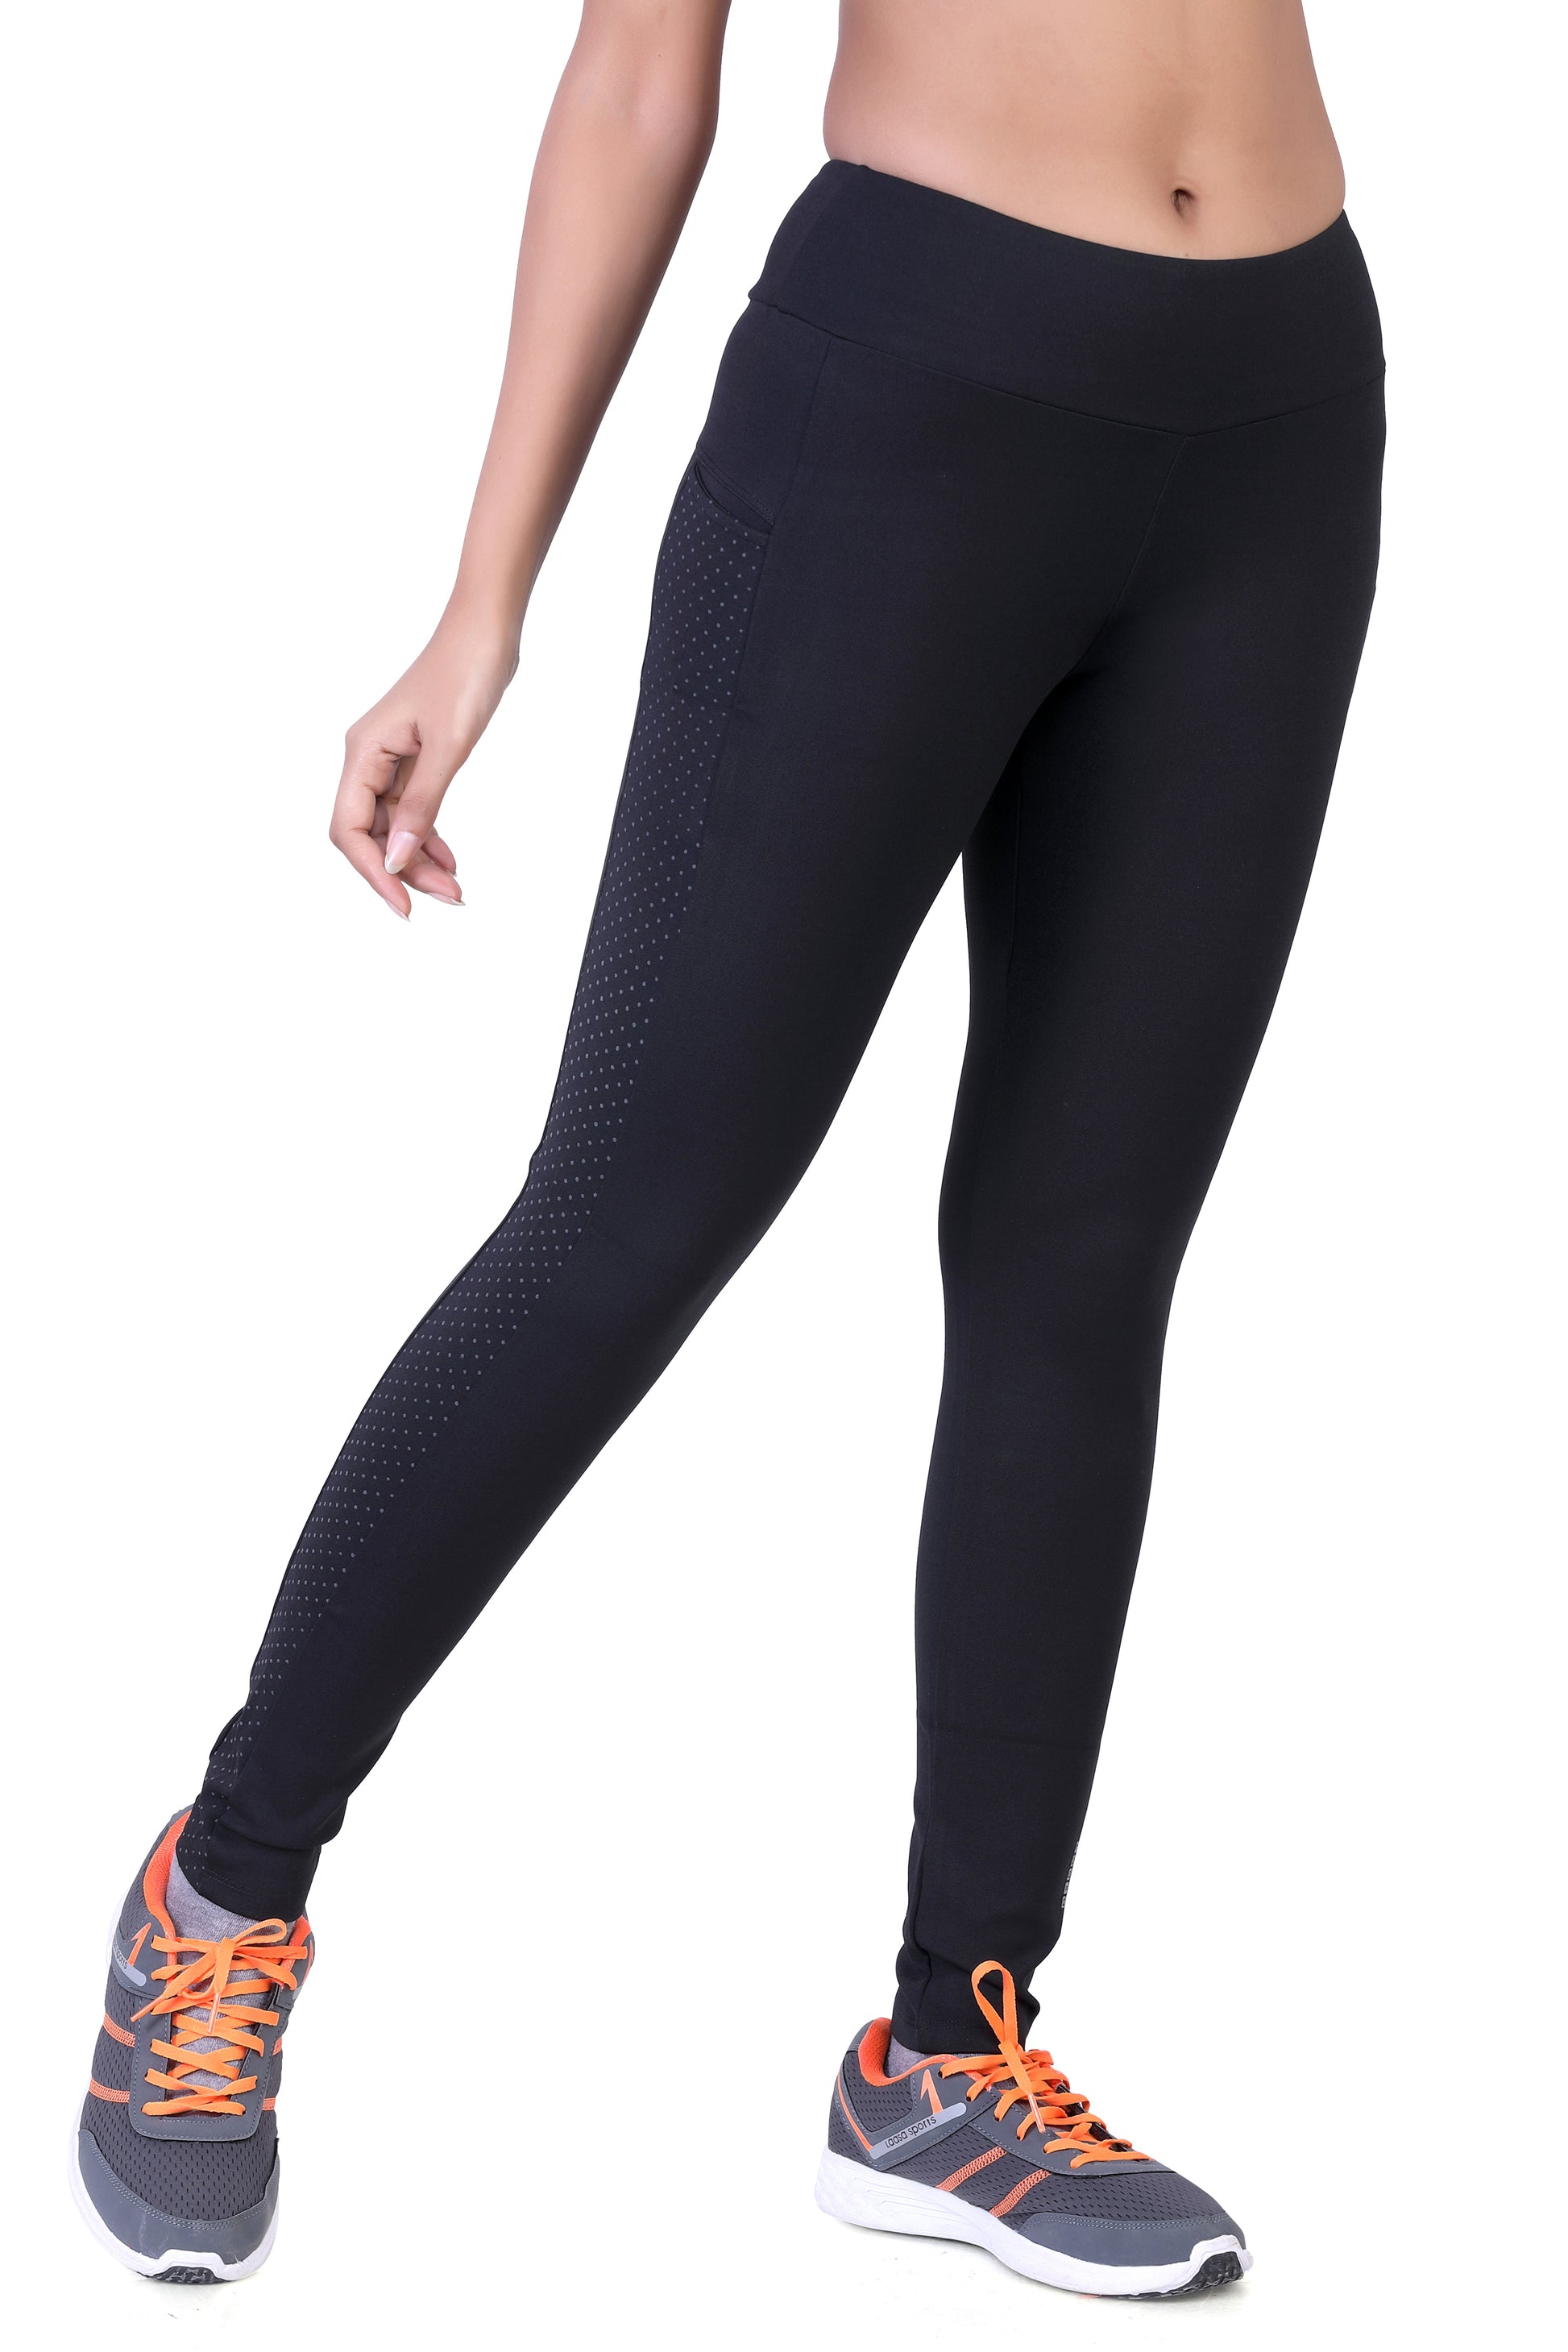 Buy Women's Leggings with Pockets - Non See Through Yoga Pants Buttery Soft High  Waist Tummy Control Workout Athletic Tights, Black, Small-Medium at